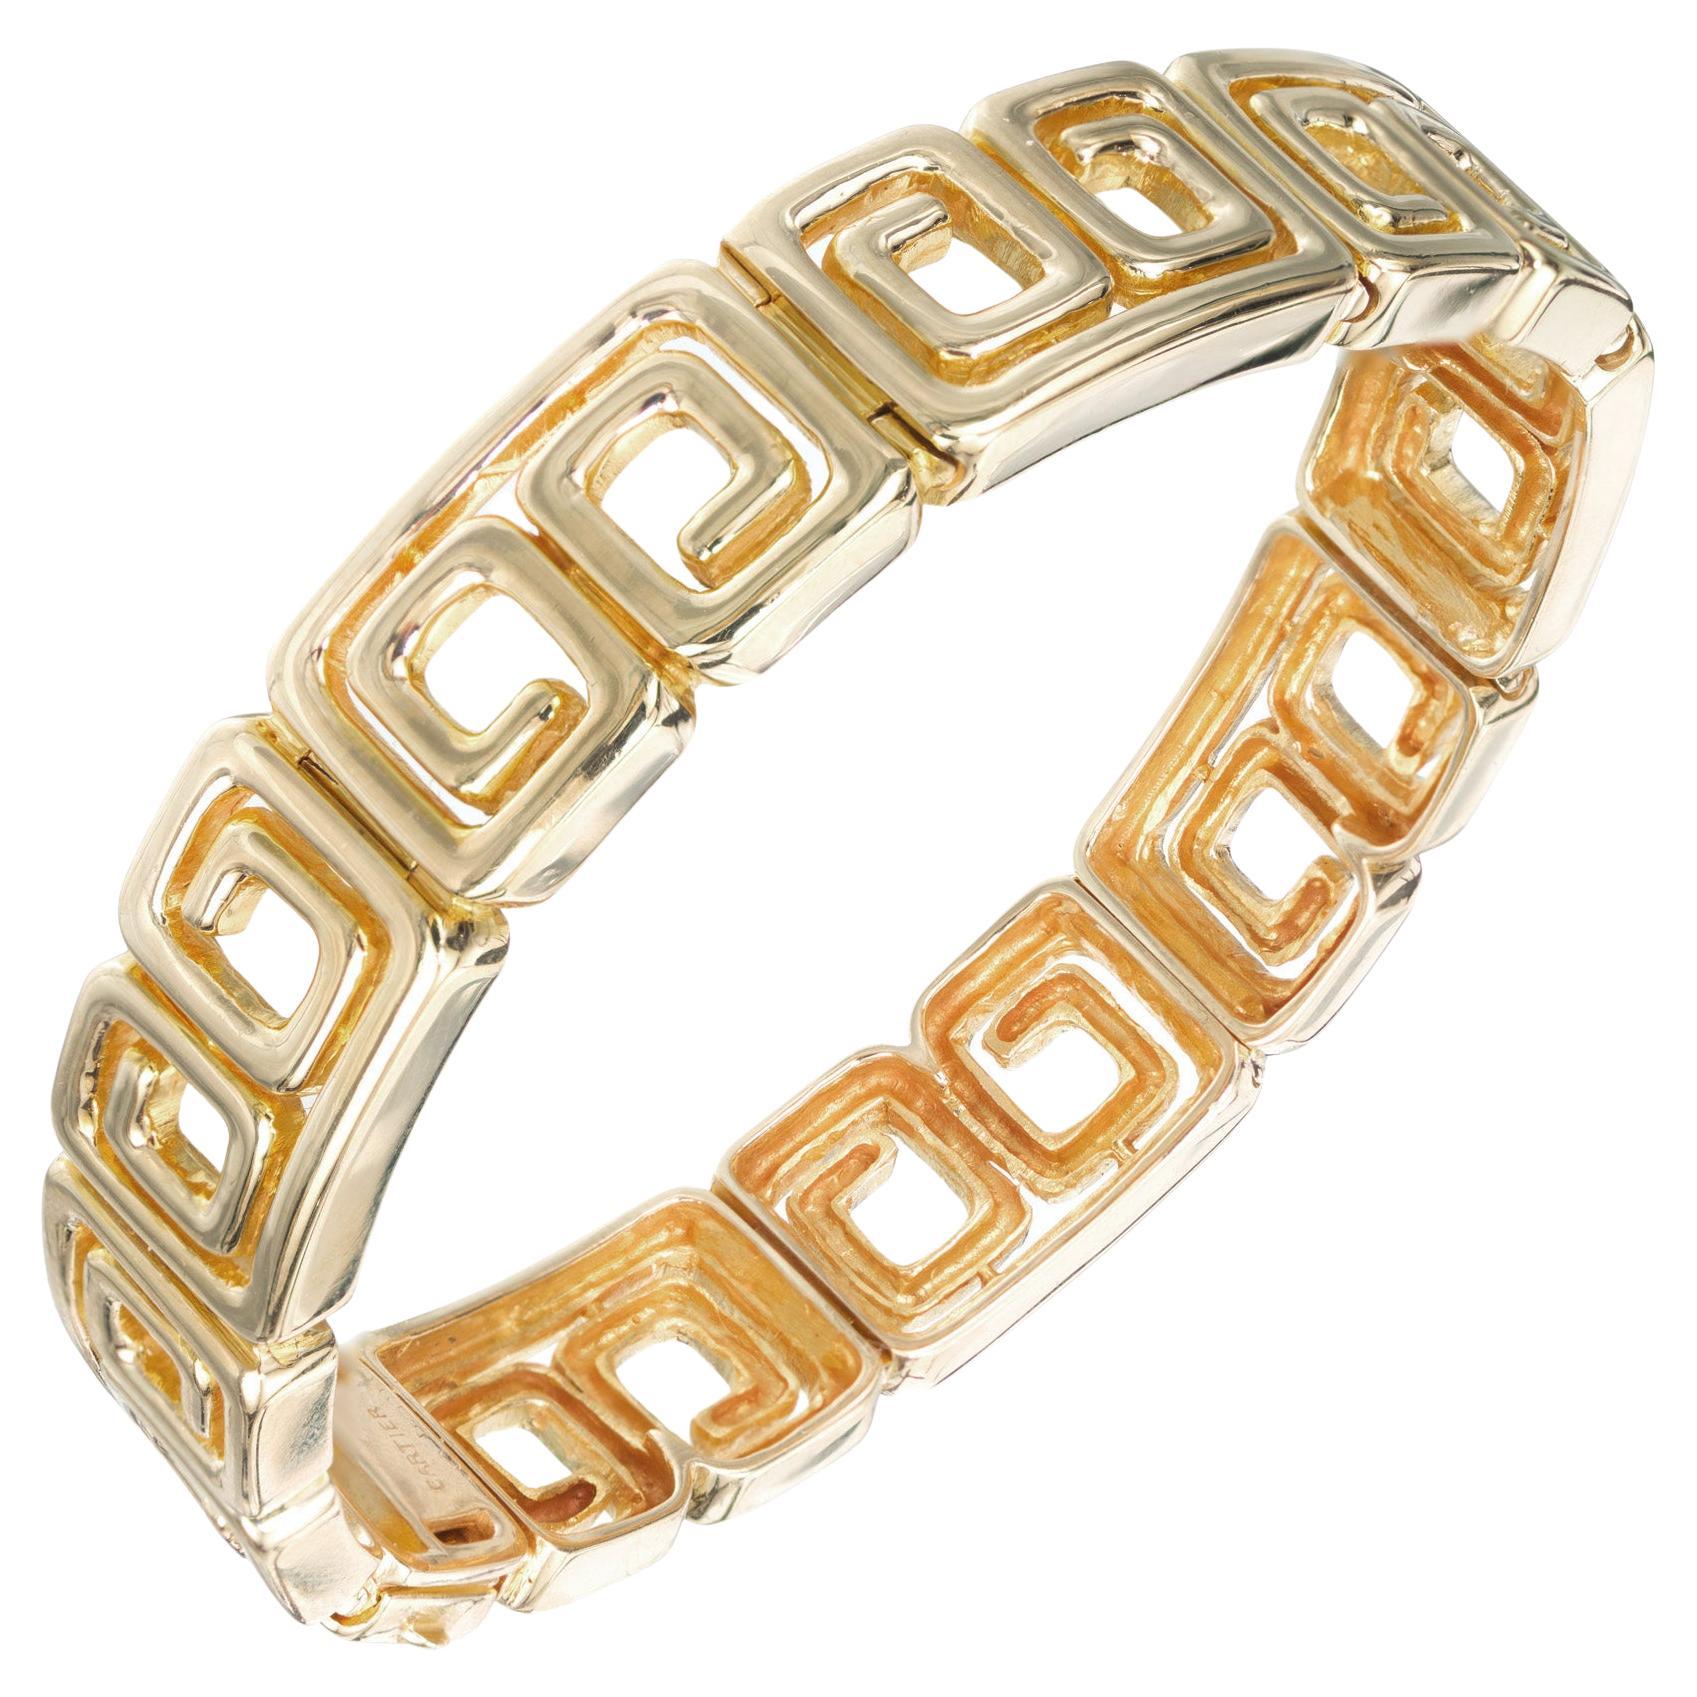 Hard to find 1970's 14k yellow gold double C bracelet. Fits up to 7.5 wrist.  Made by Whiteside & Blank for Cartier in 14k solid gold. Whiteside & Blank is a US company that has made jewelry and watches for Cartier since the early 1900's. During the